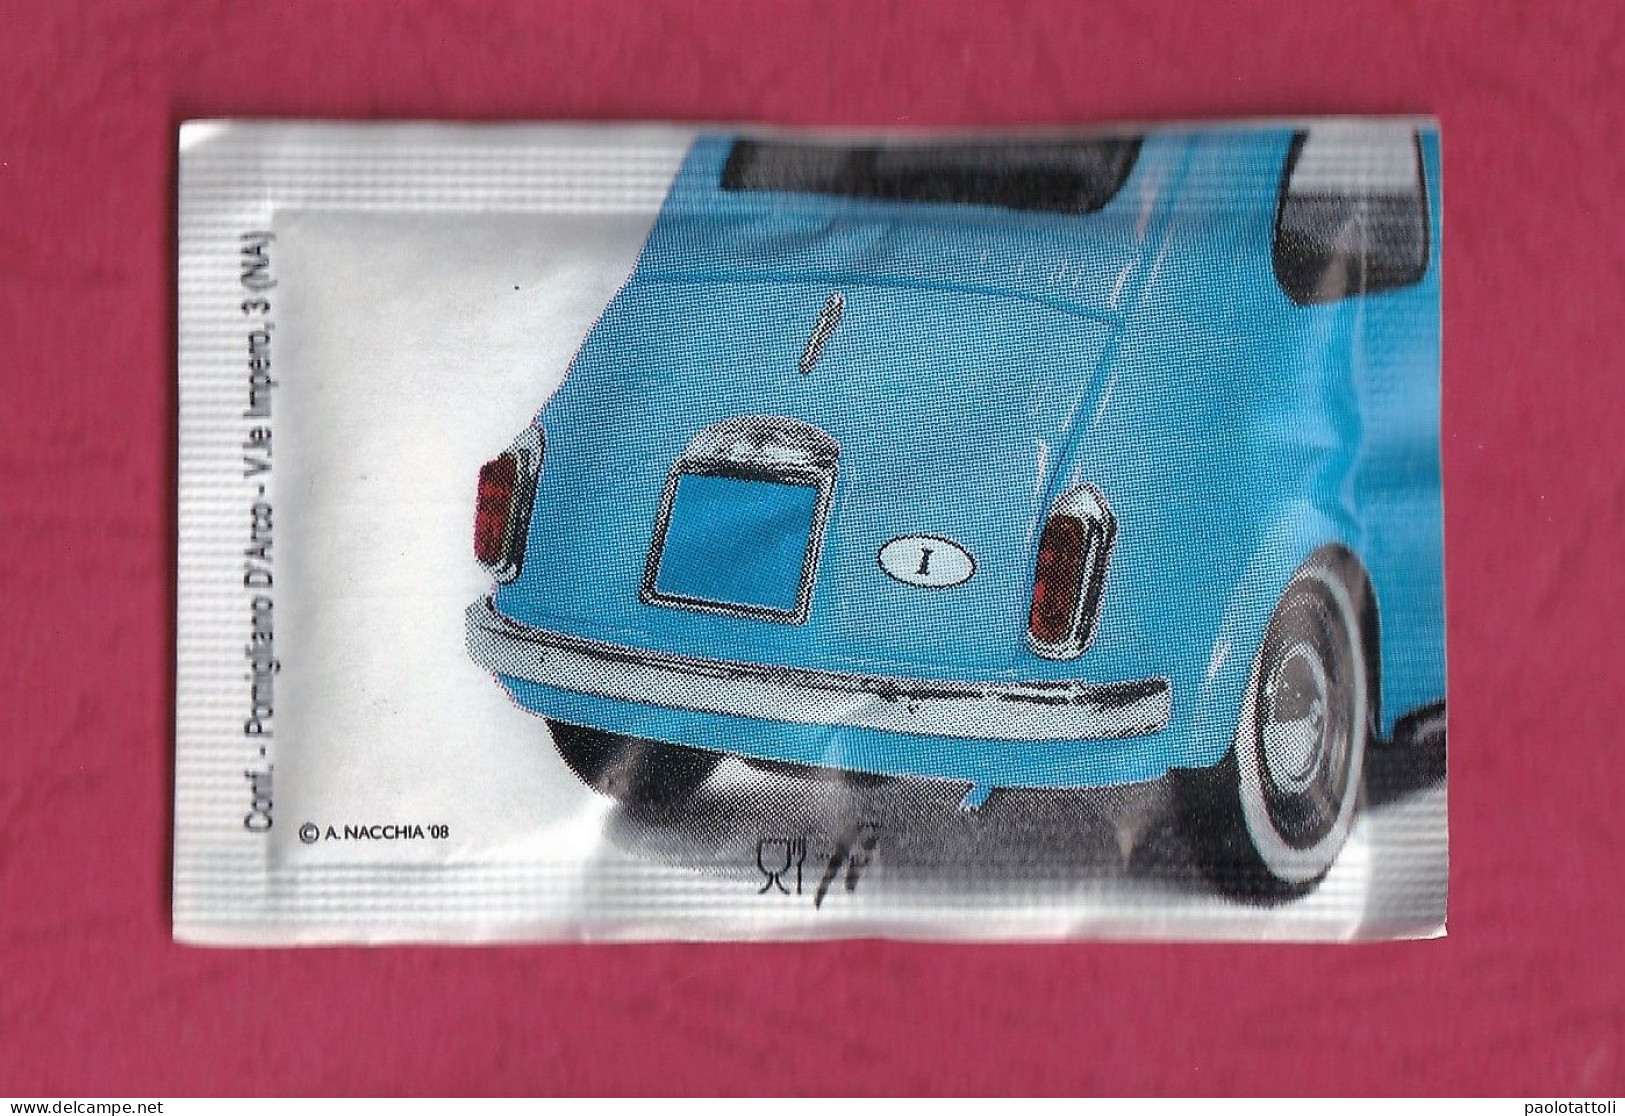 Bustina Zucchero Piena, Full Sugar Pack- Auto-Car FIAT 500. Packed At Pomigliano D'Arco-NA- - Sucres